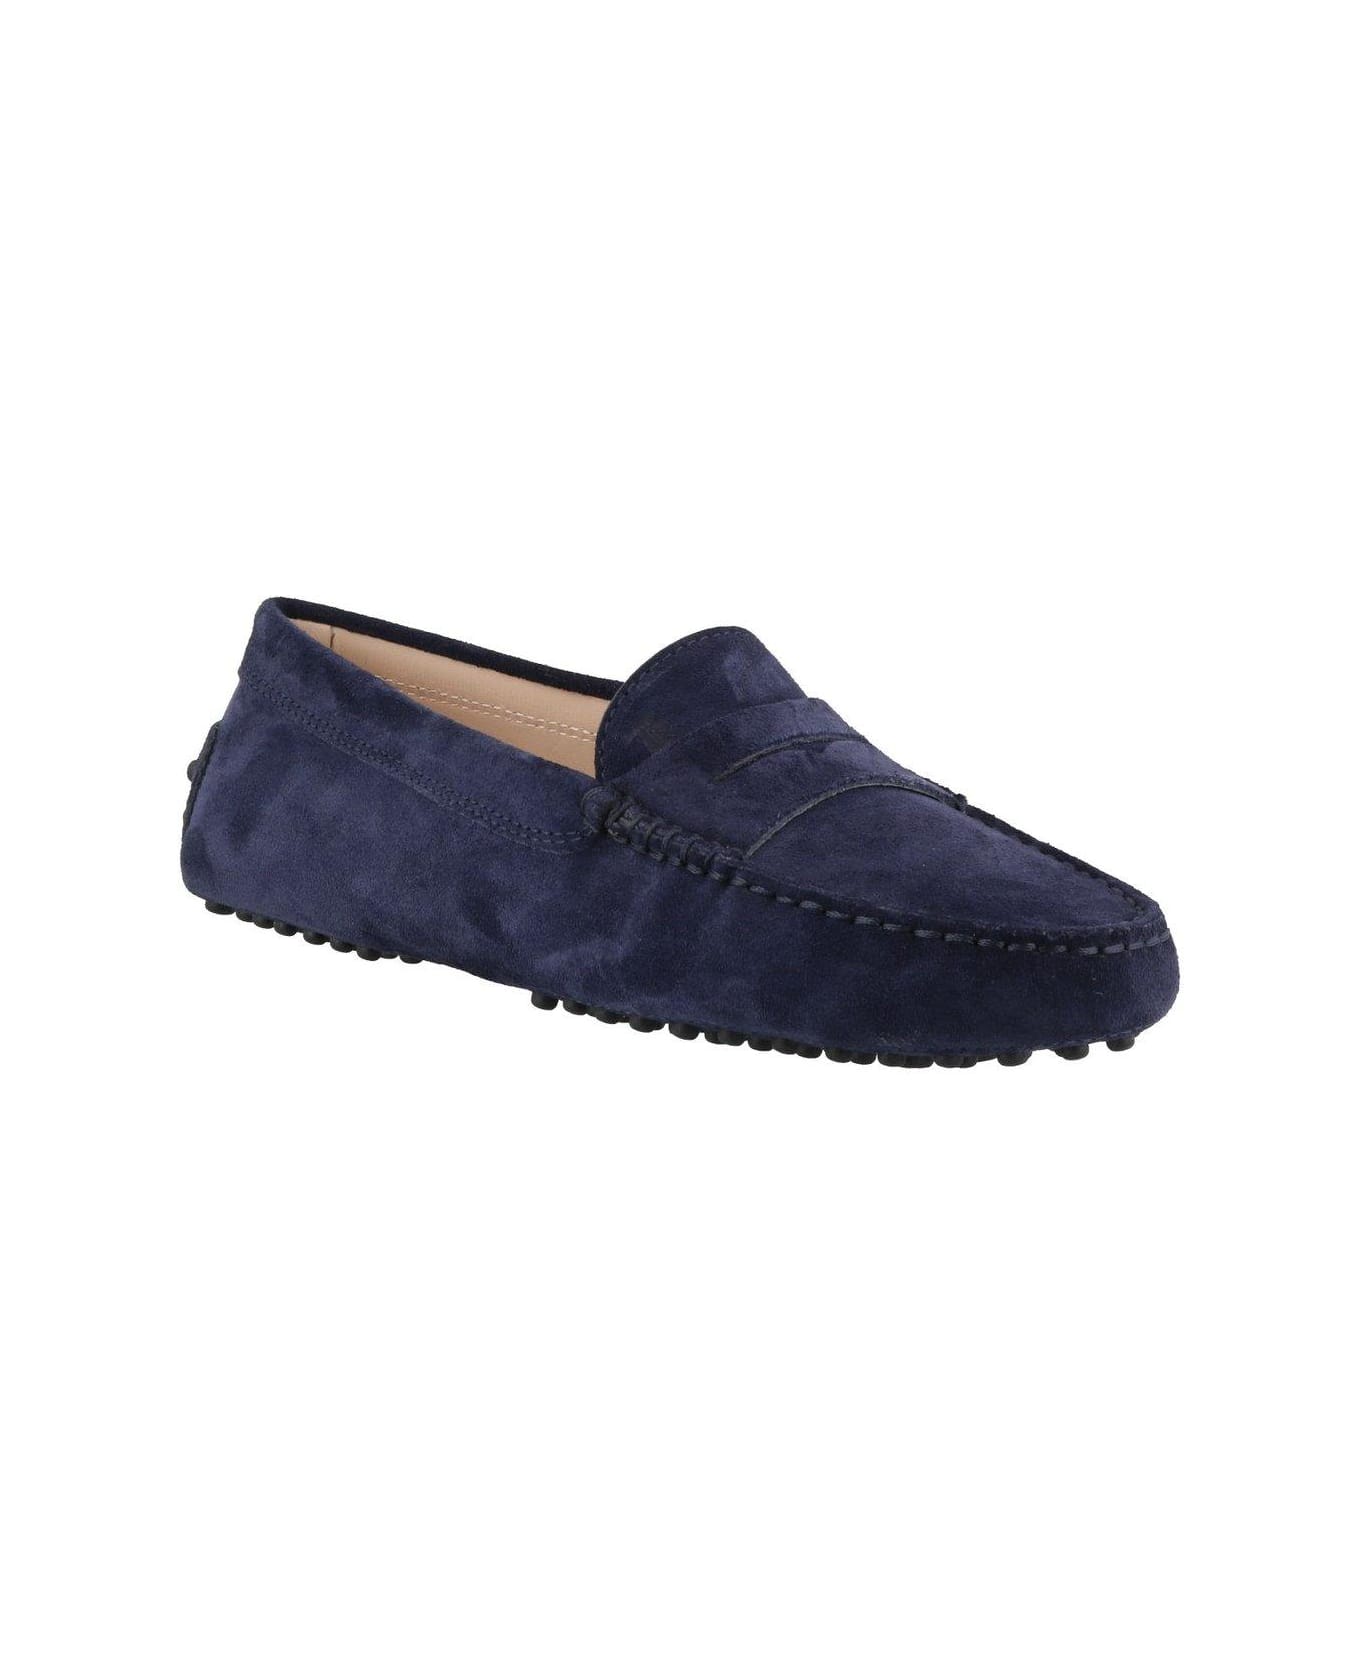 Tod's Gommino Penny Bar Driving Shoes - Blue